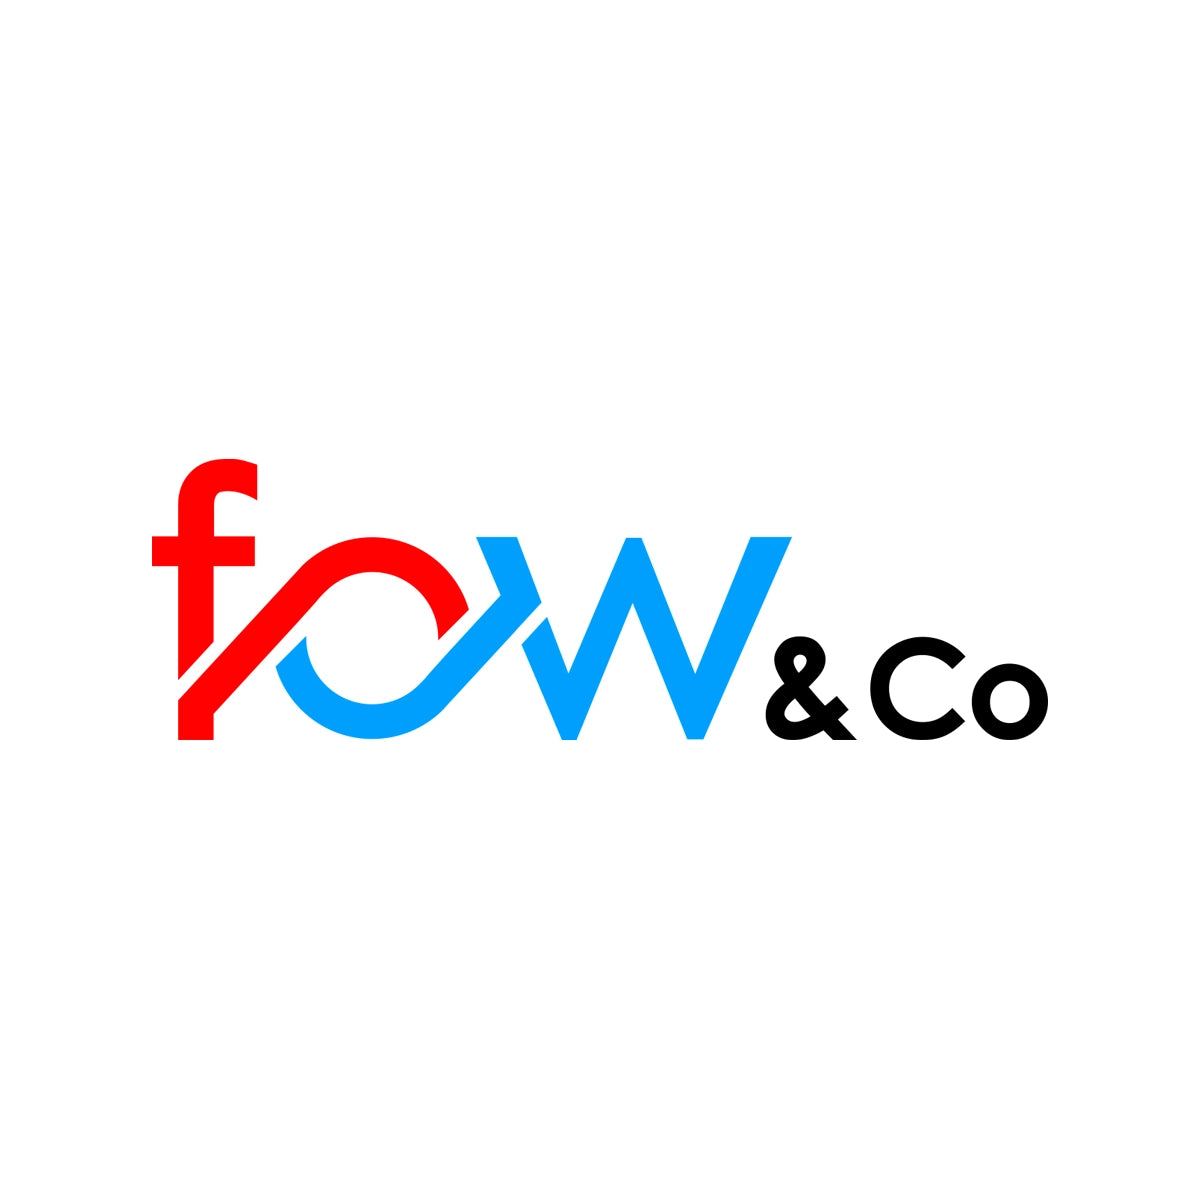 FOW.CO